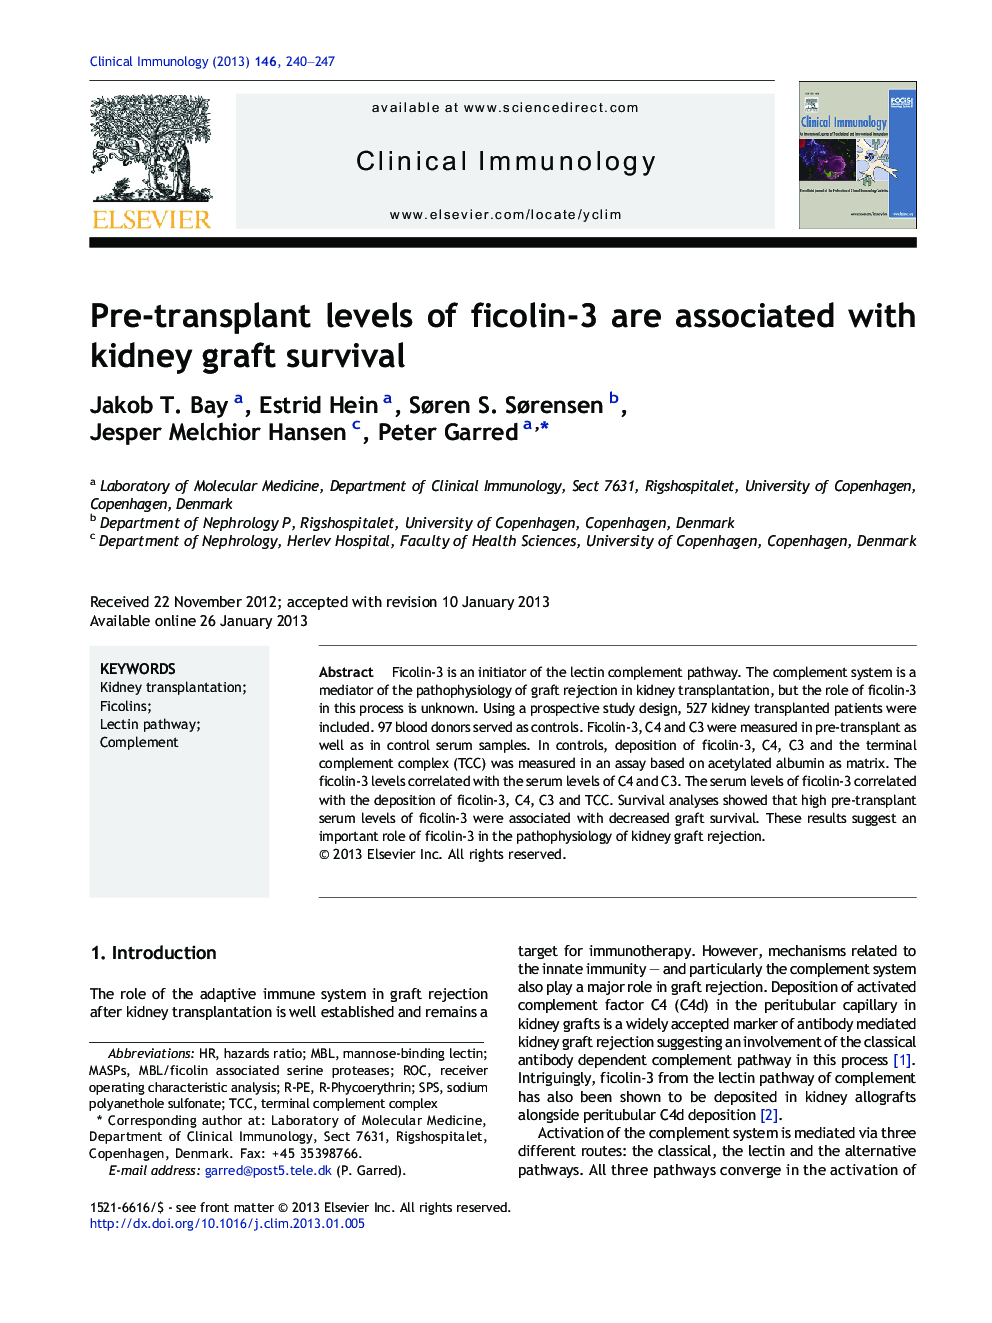 Pre-transplant levels of ficolin-3 are associated with kidney graft survival